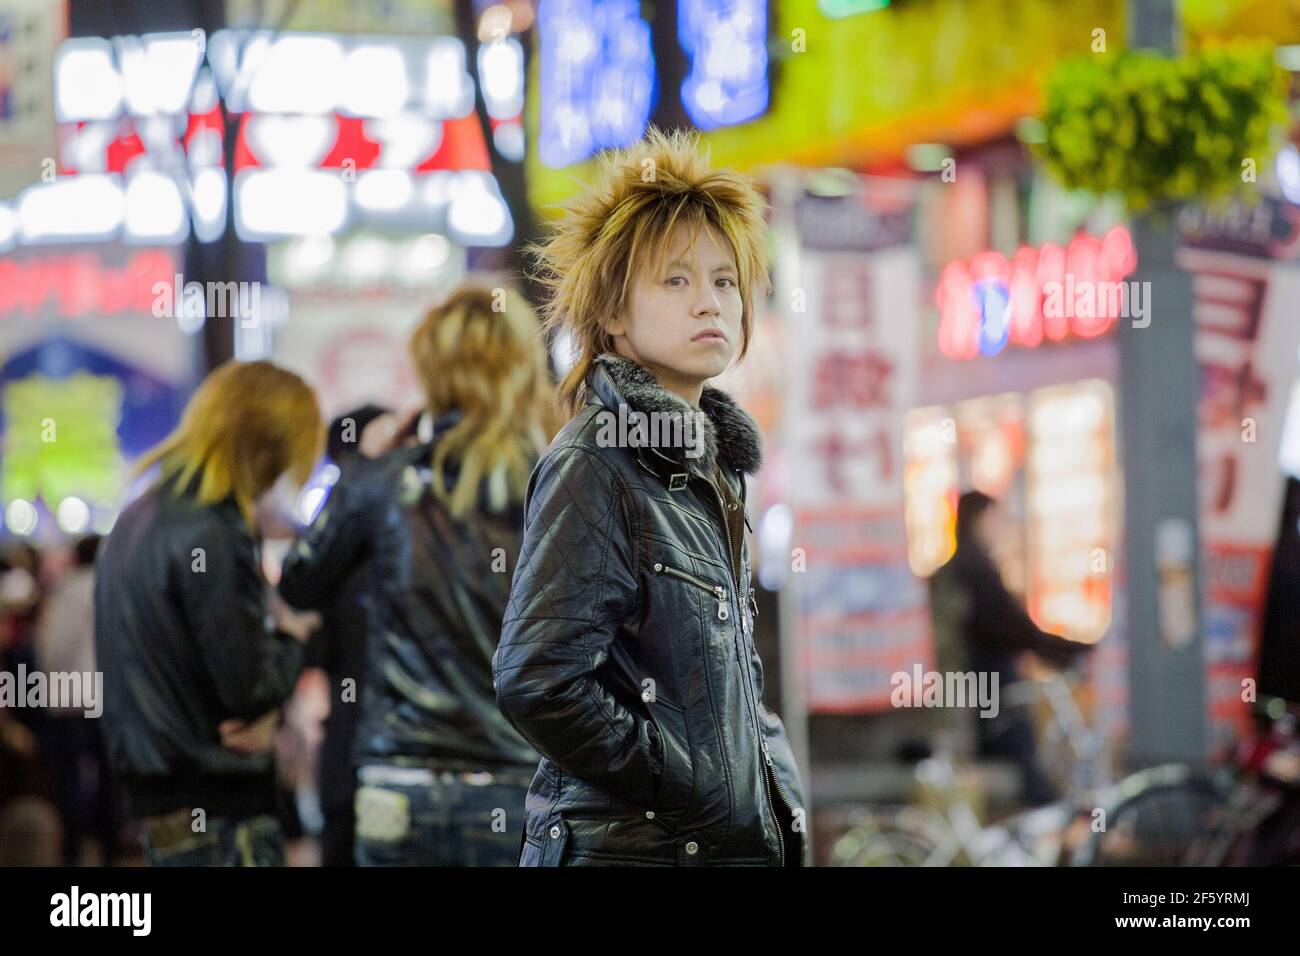 Japanese male host touting for business on the streets of Shinjuku, Tokyo, Japan Stock Photo